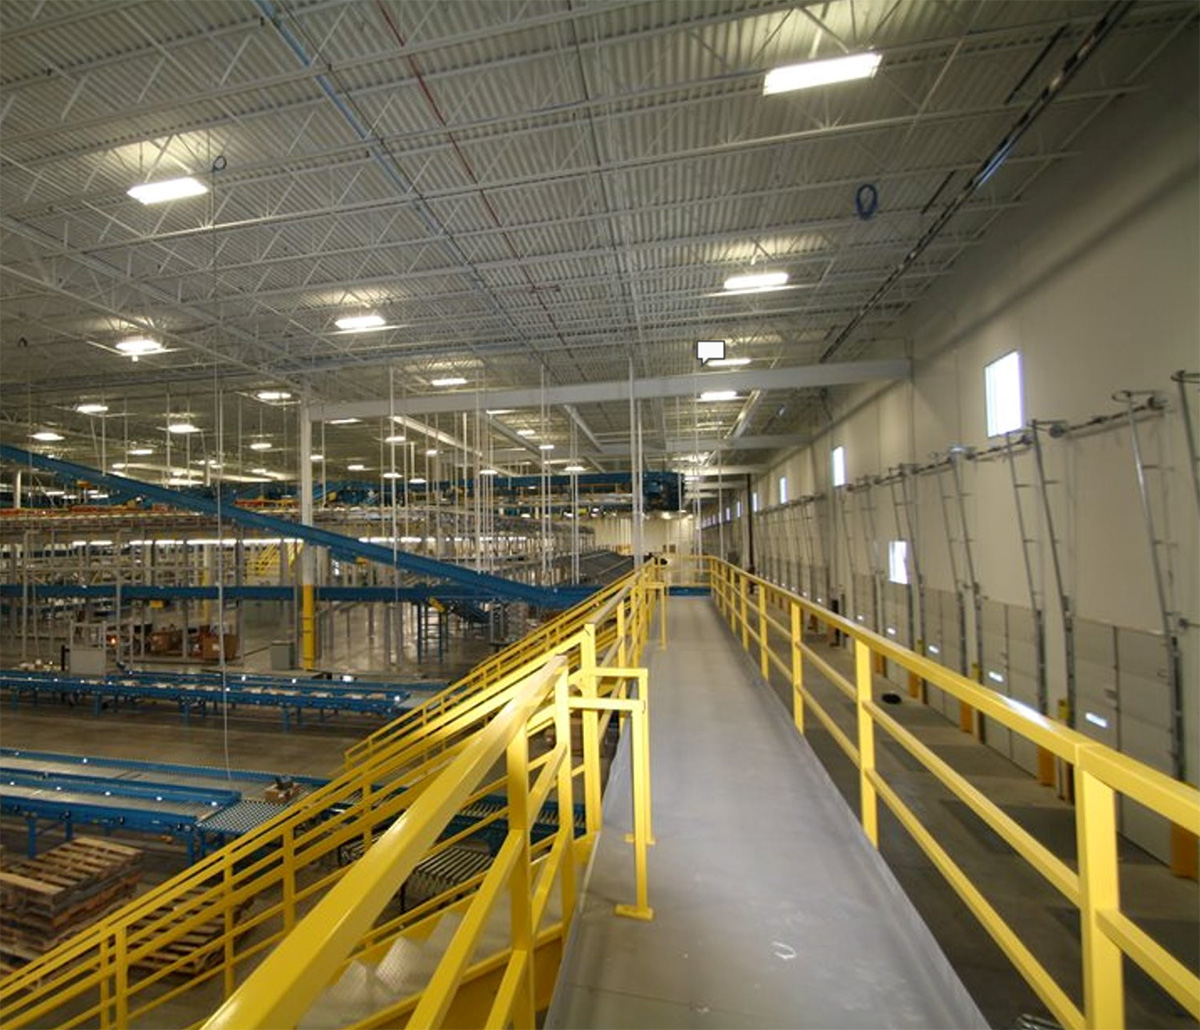 MiTek Handrails Engineered Systems Products - Handrails in a warehouse